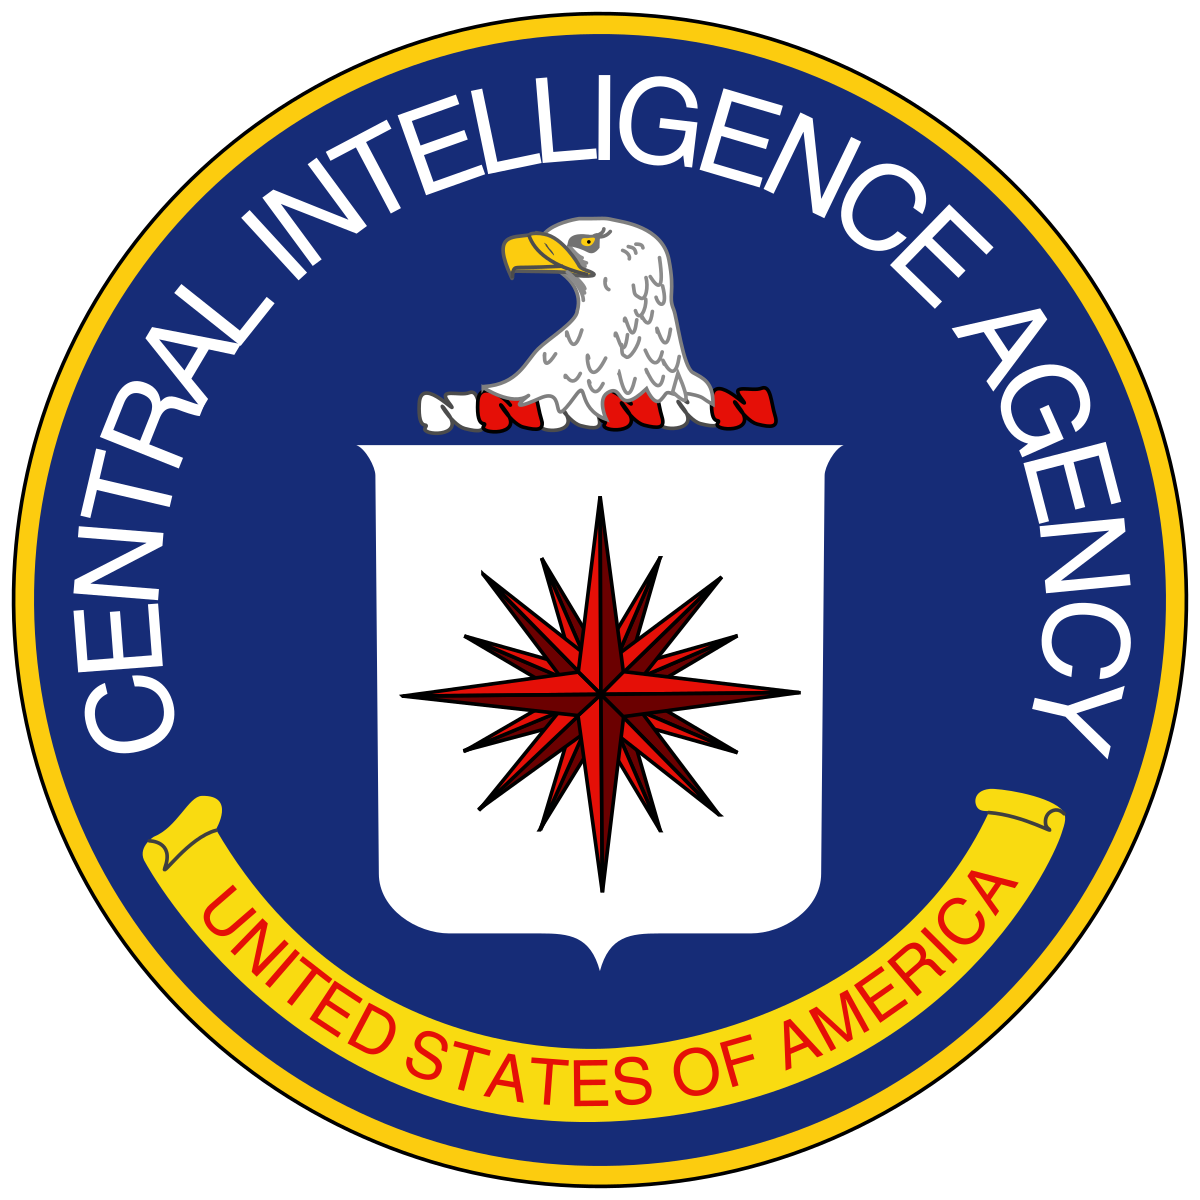 What is CIA